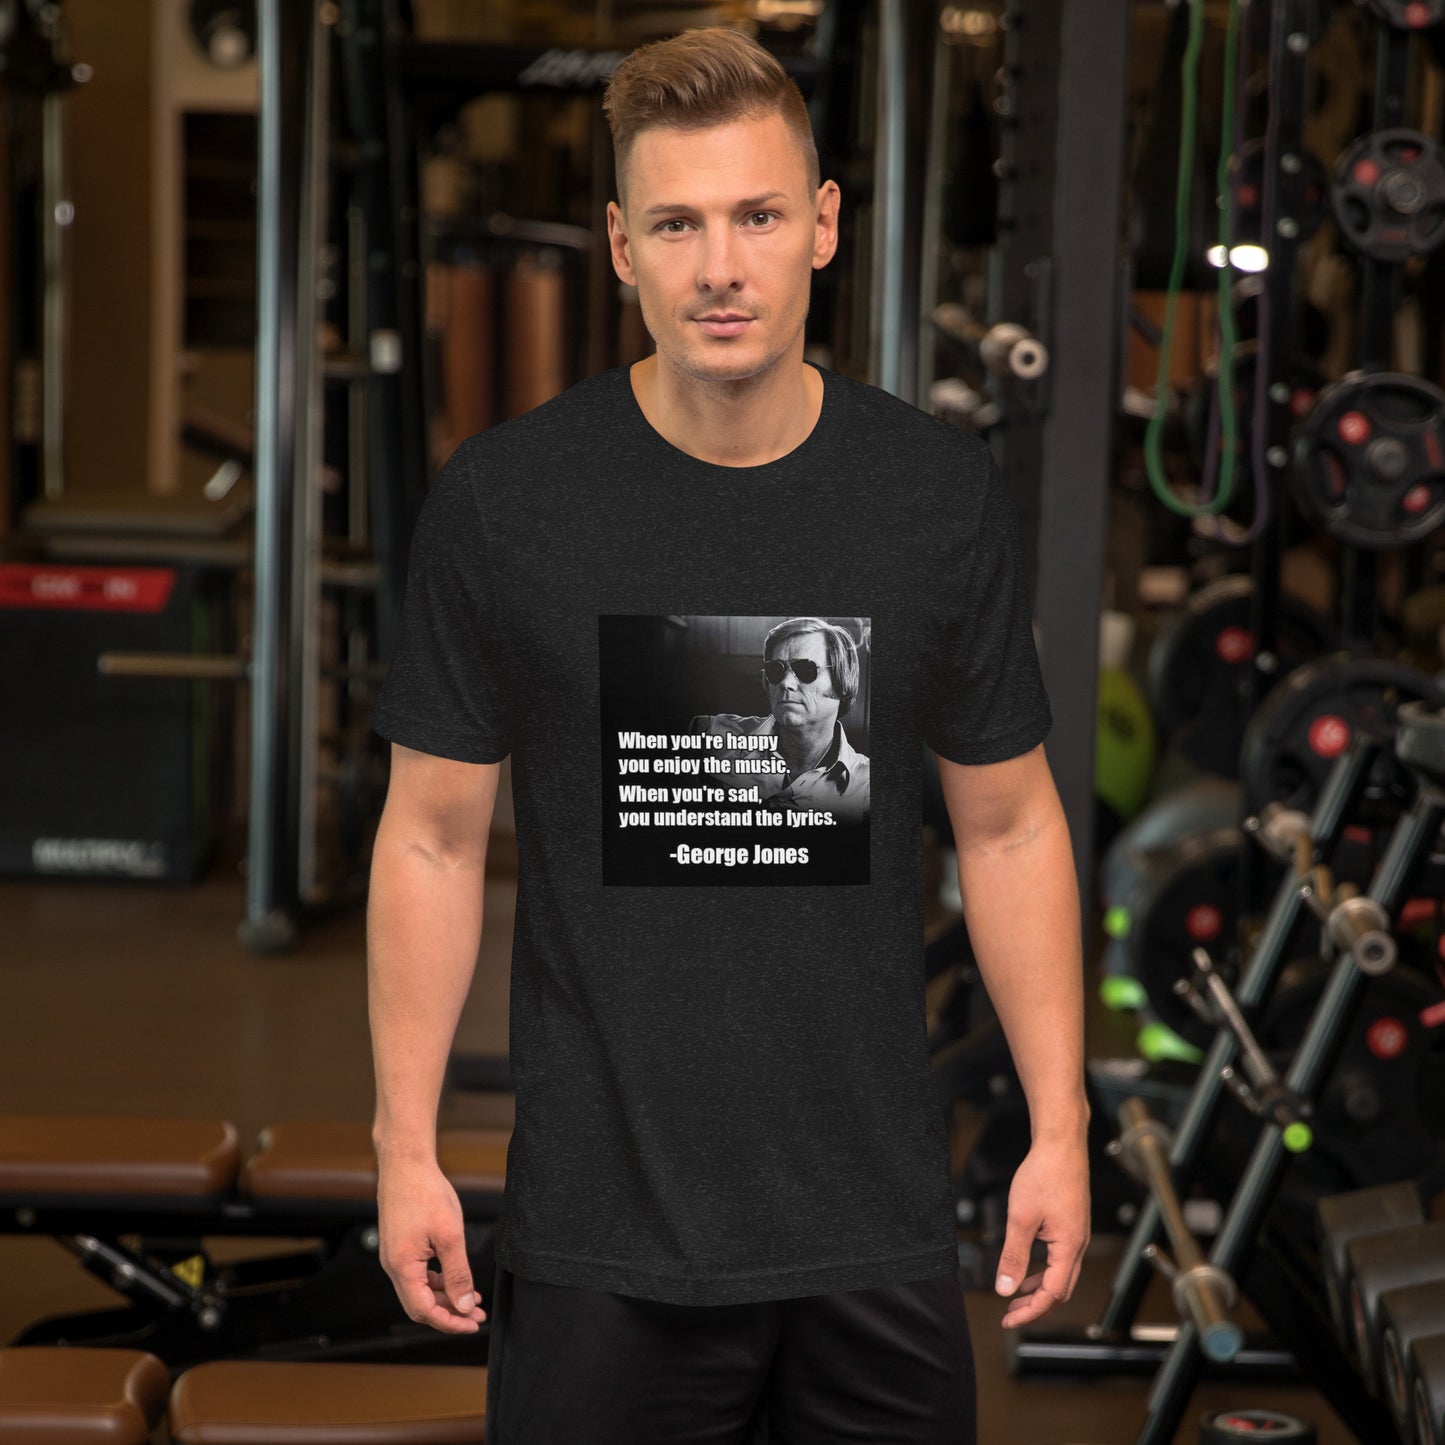 George & Music - Get Your Twang On with Classic Country Tees - The Ultimate Unisex T-Shirt for True Country Souls! - Classic Country Tees